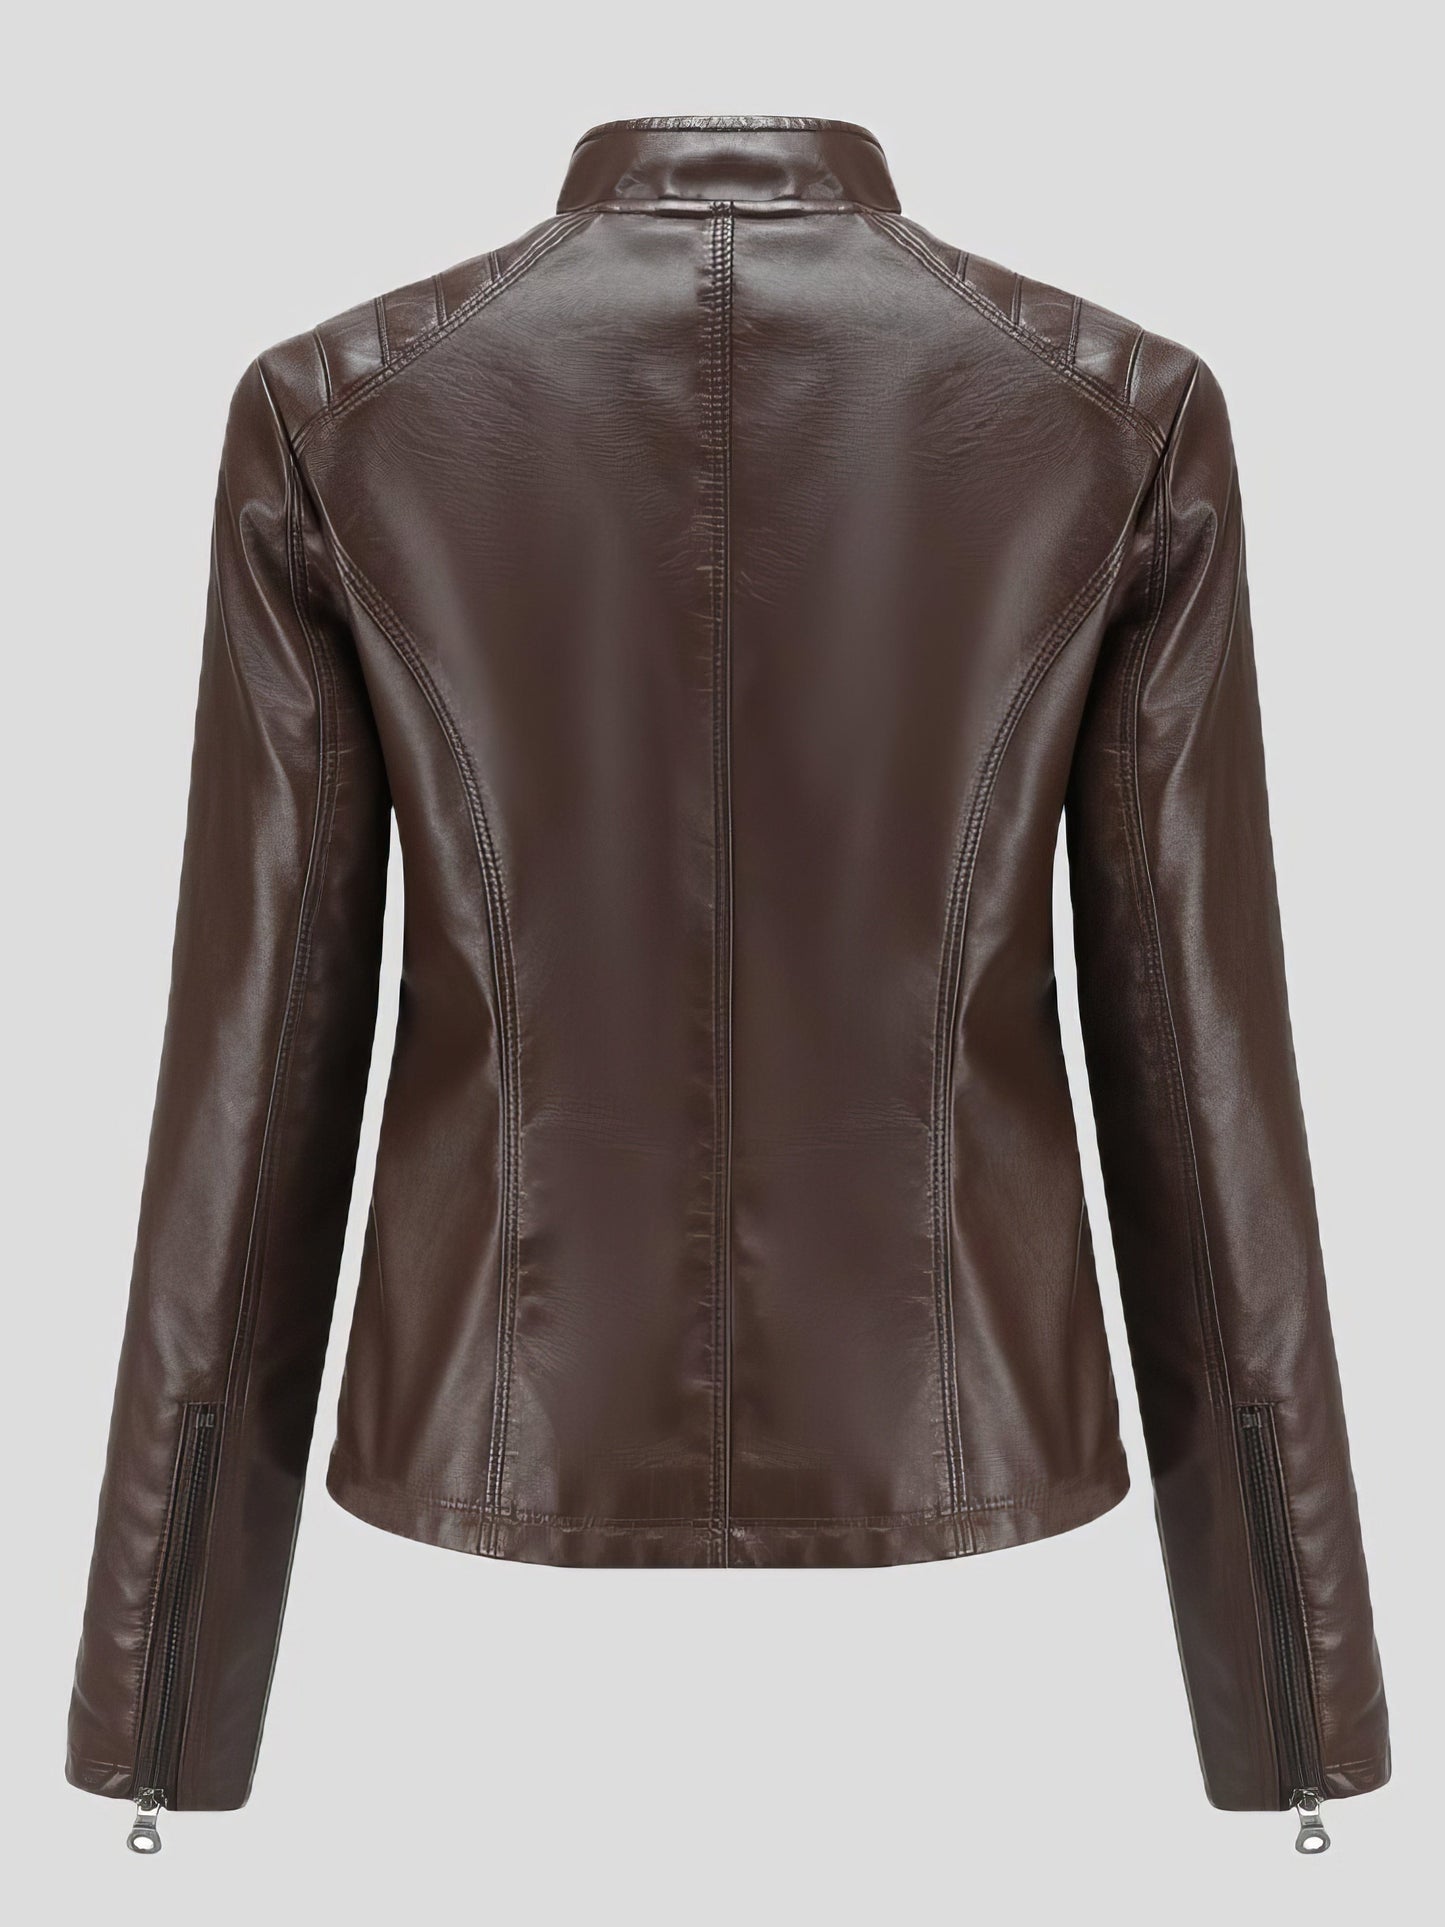 MsDressly Jackets Casual Stand-Collar Slim Solid Leather Jacket